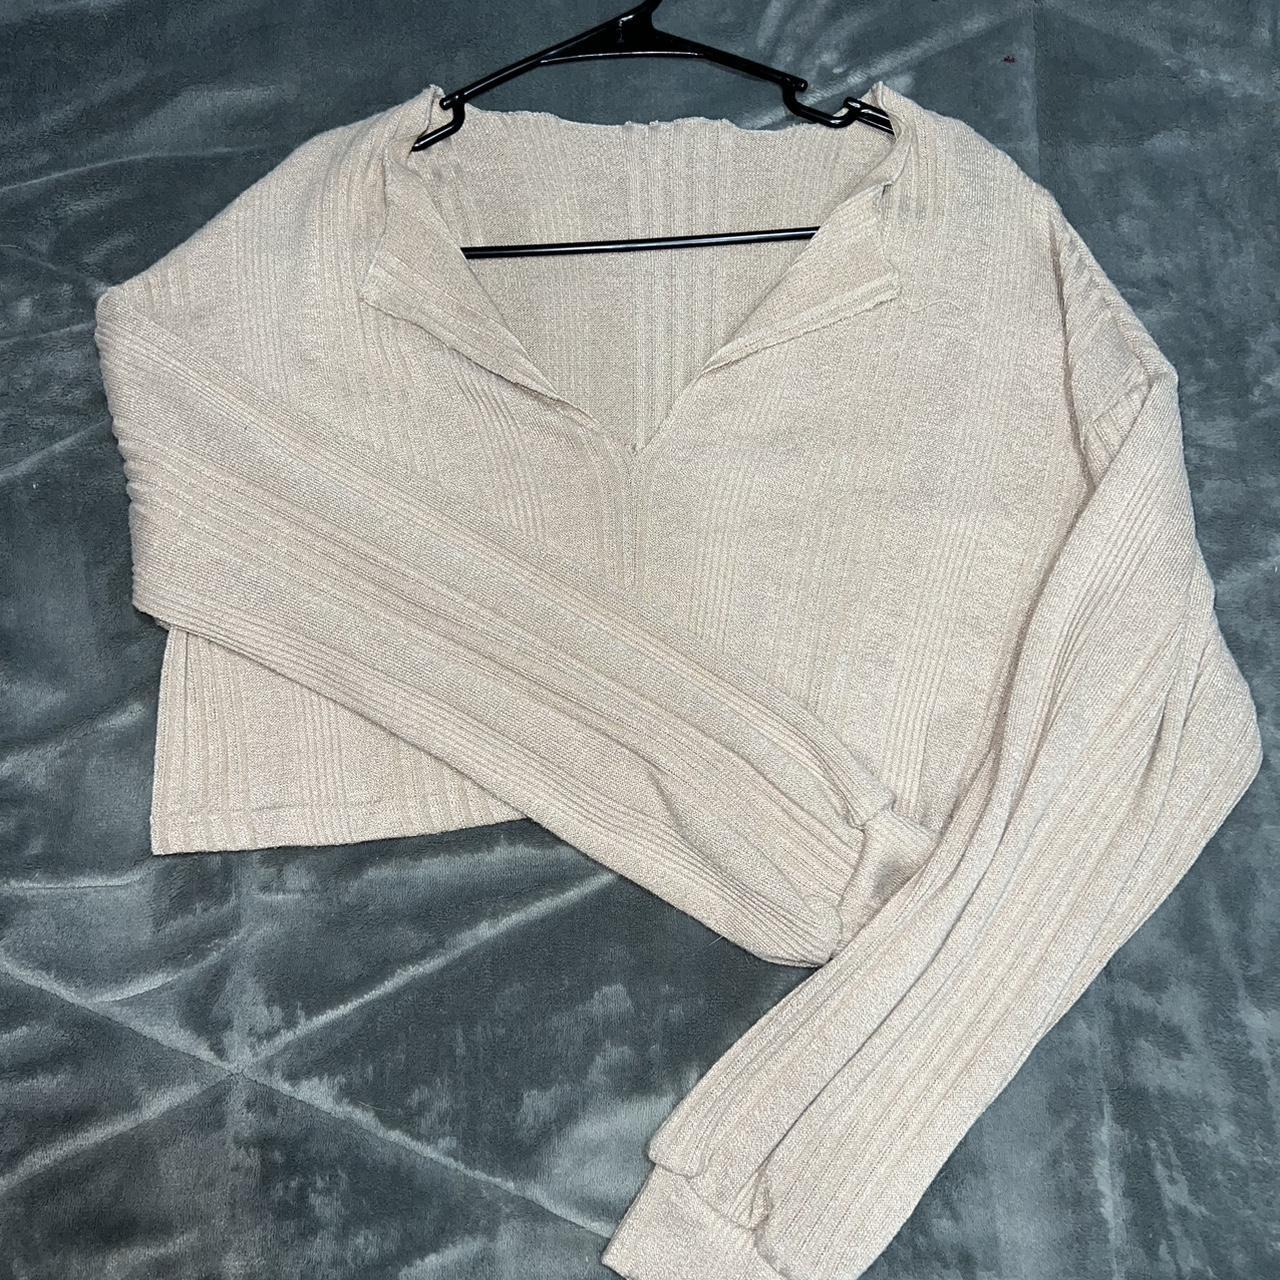 Tan cropped sweater thrifted no flaws #sweater... - Depop